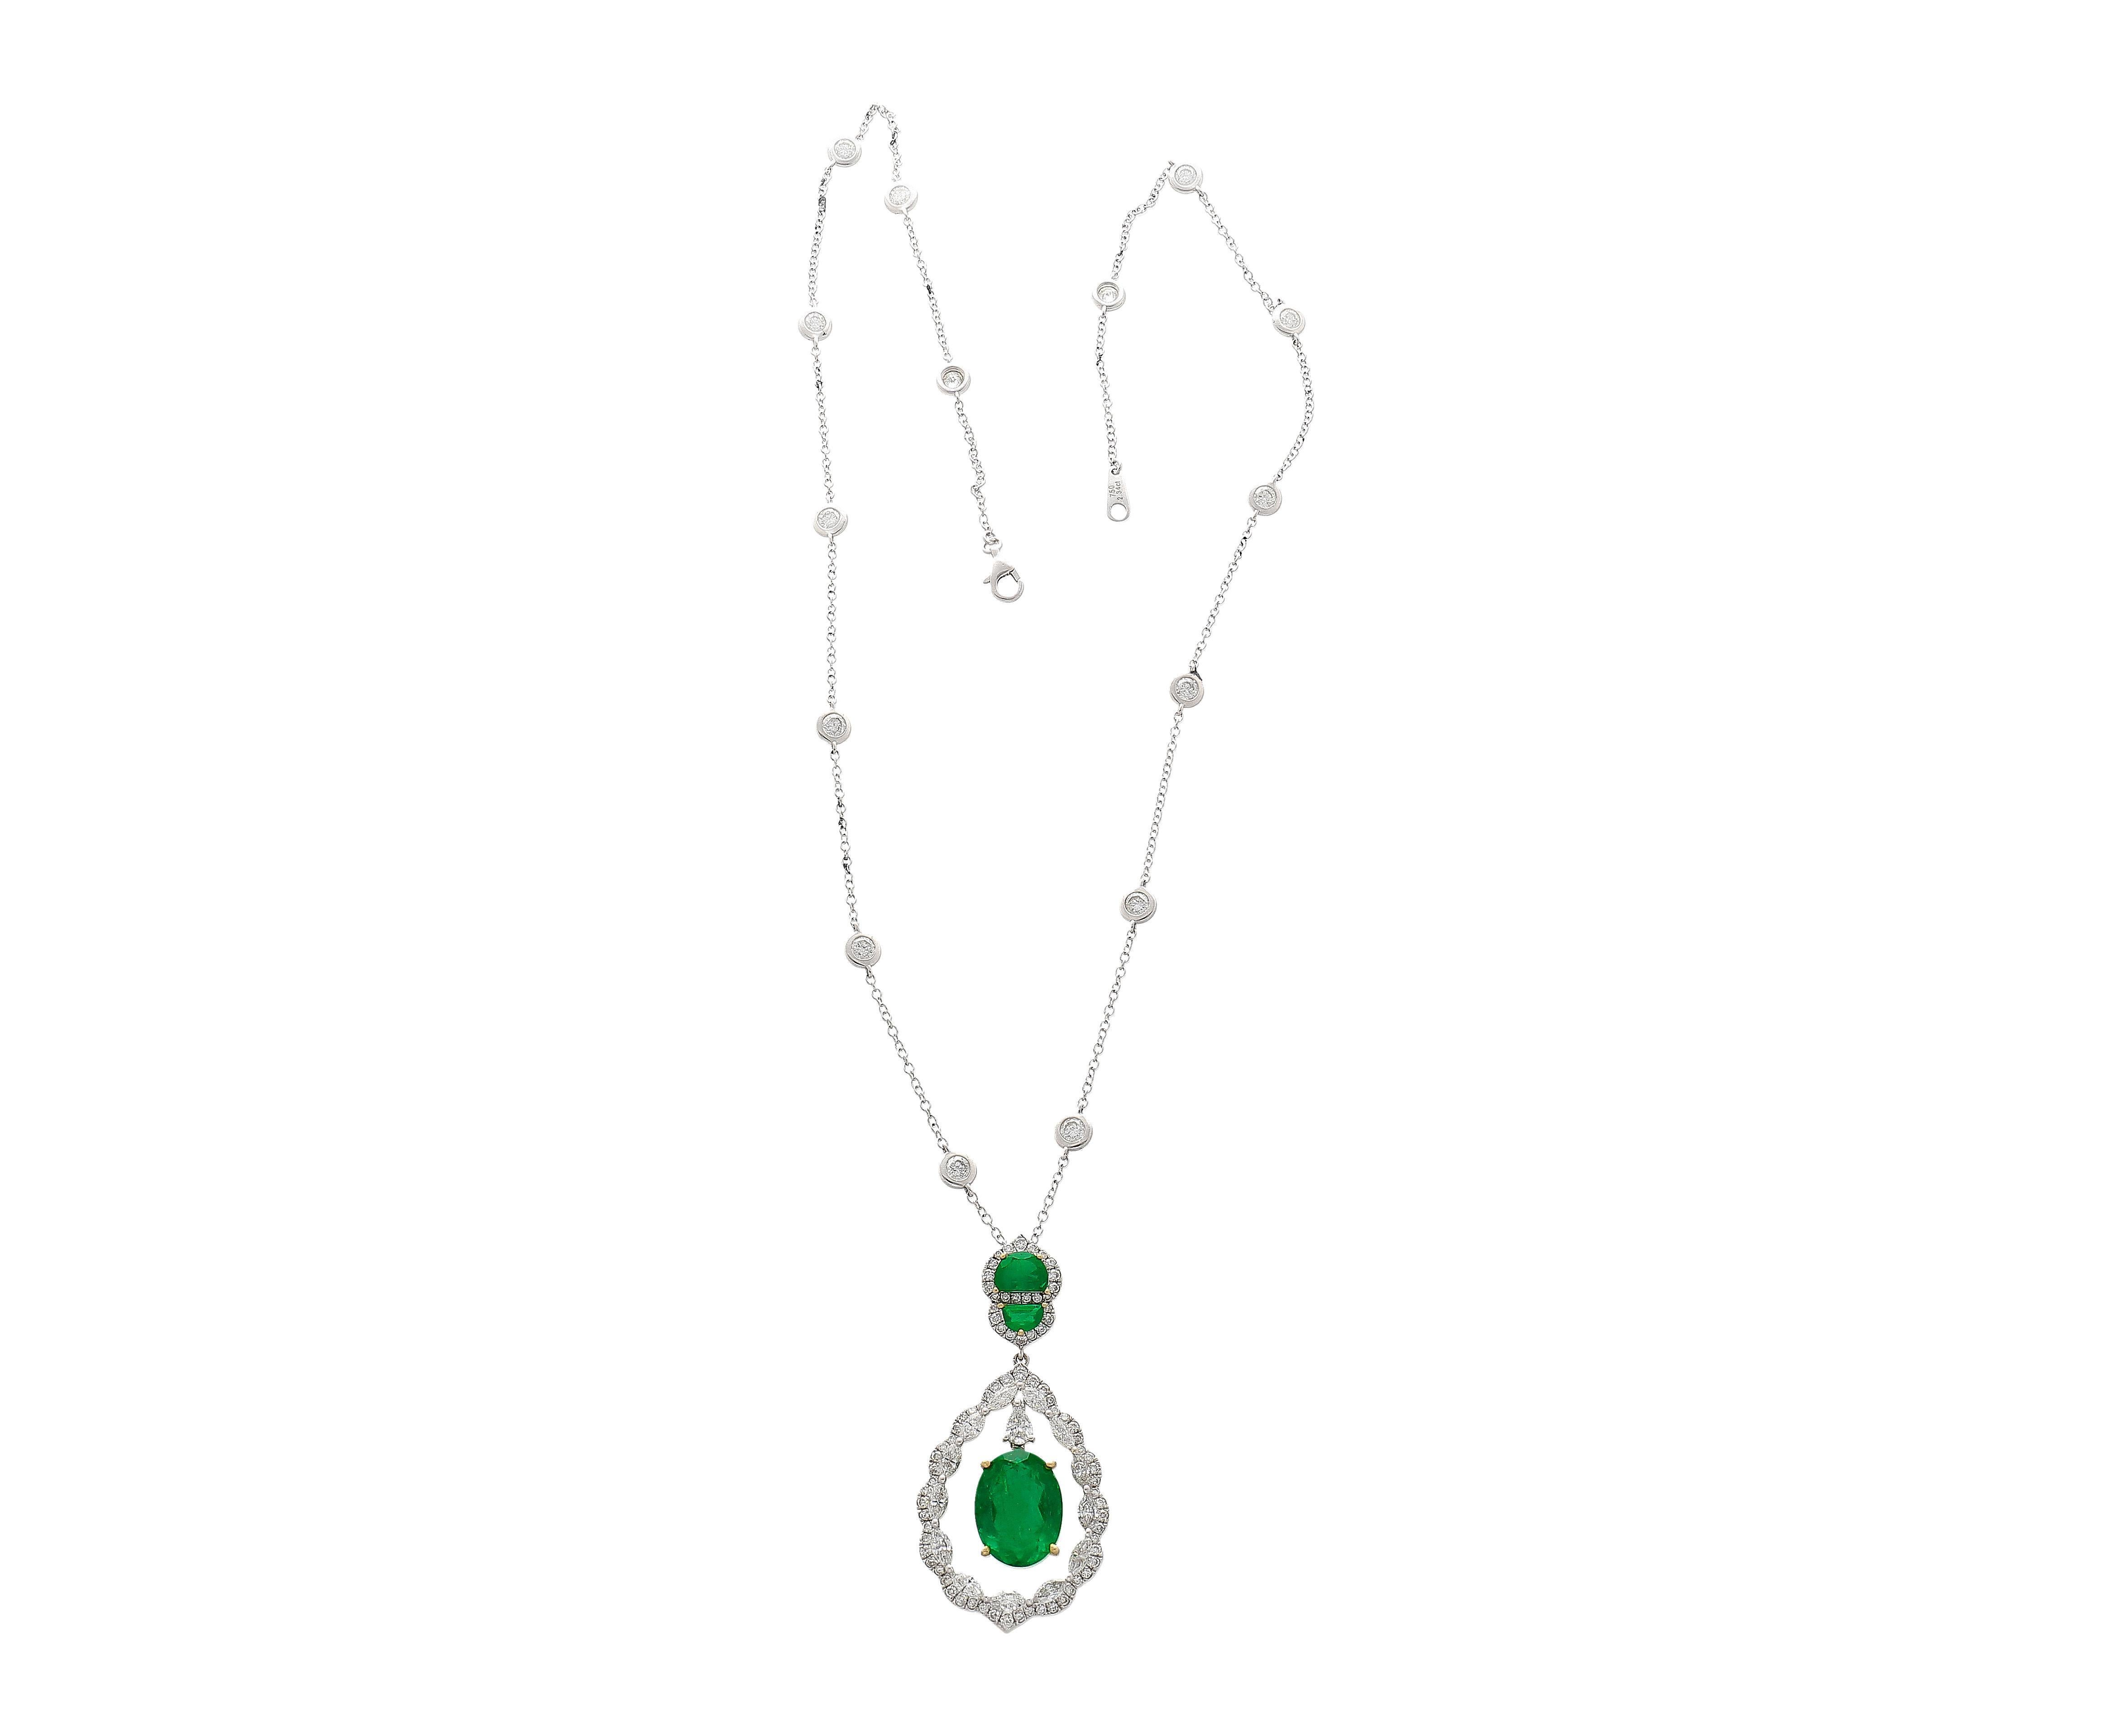 6.42 Carat Floating Emerald with Diamond & Emeralds in 18K Pendant Necklace For Sale 3